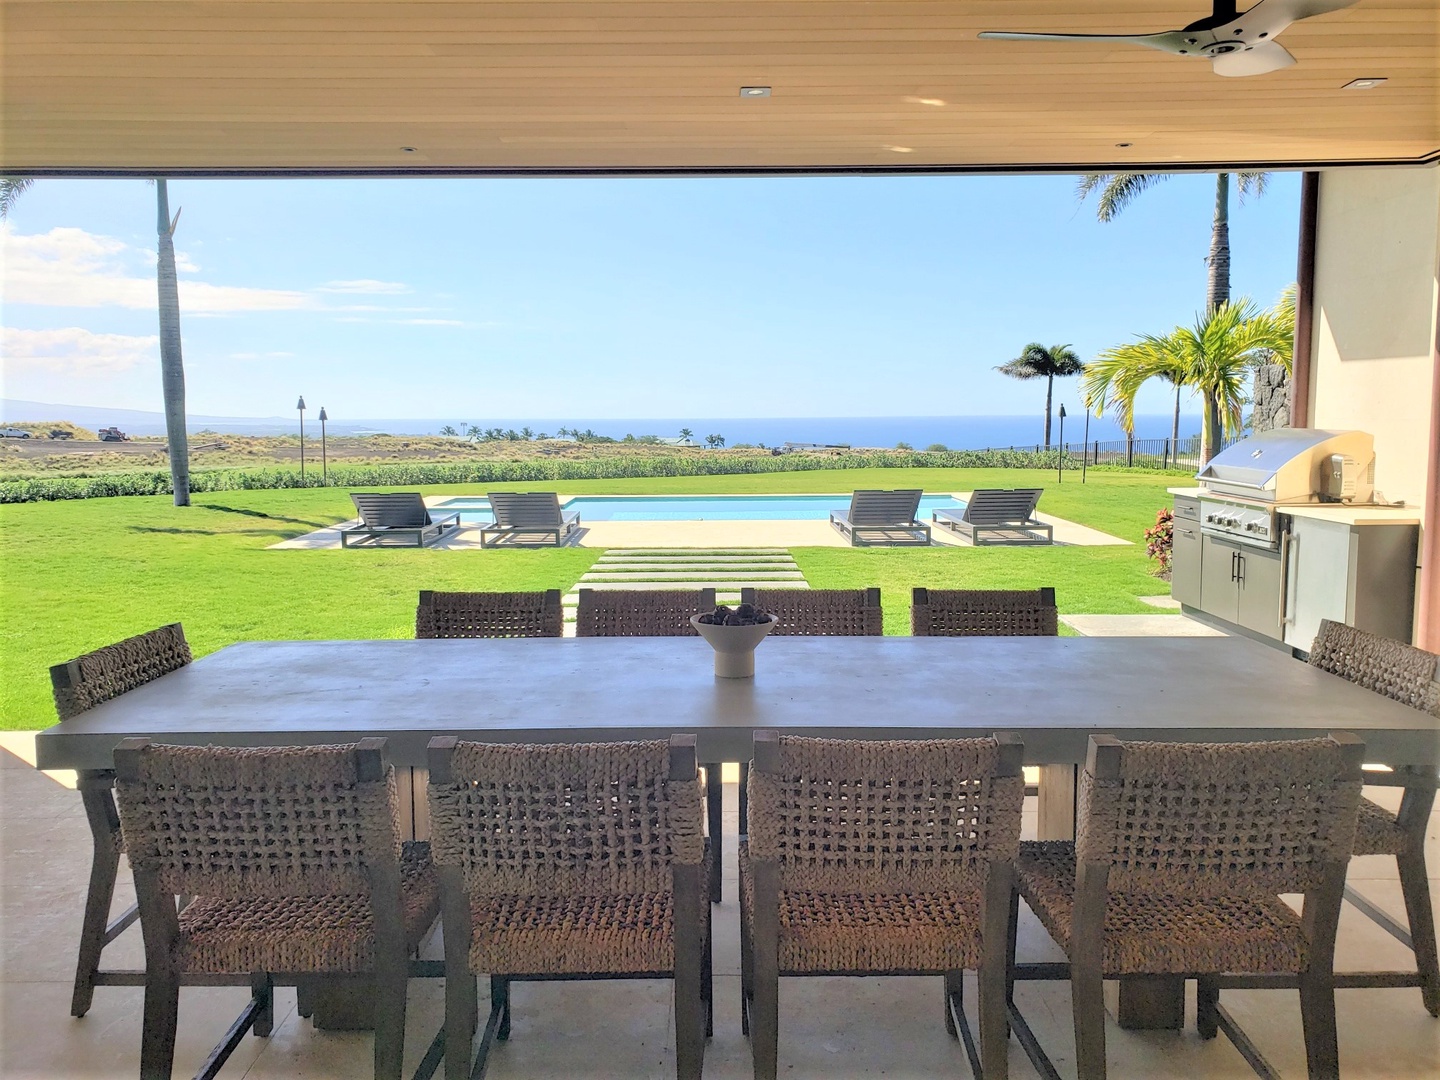 Kamuela Vacation Rentals, Hapuna Estates #8 - Views from the outdoor dining for 10